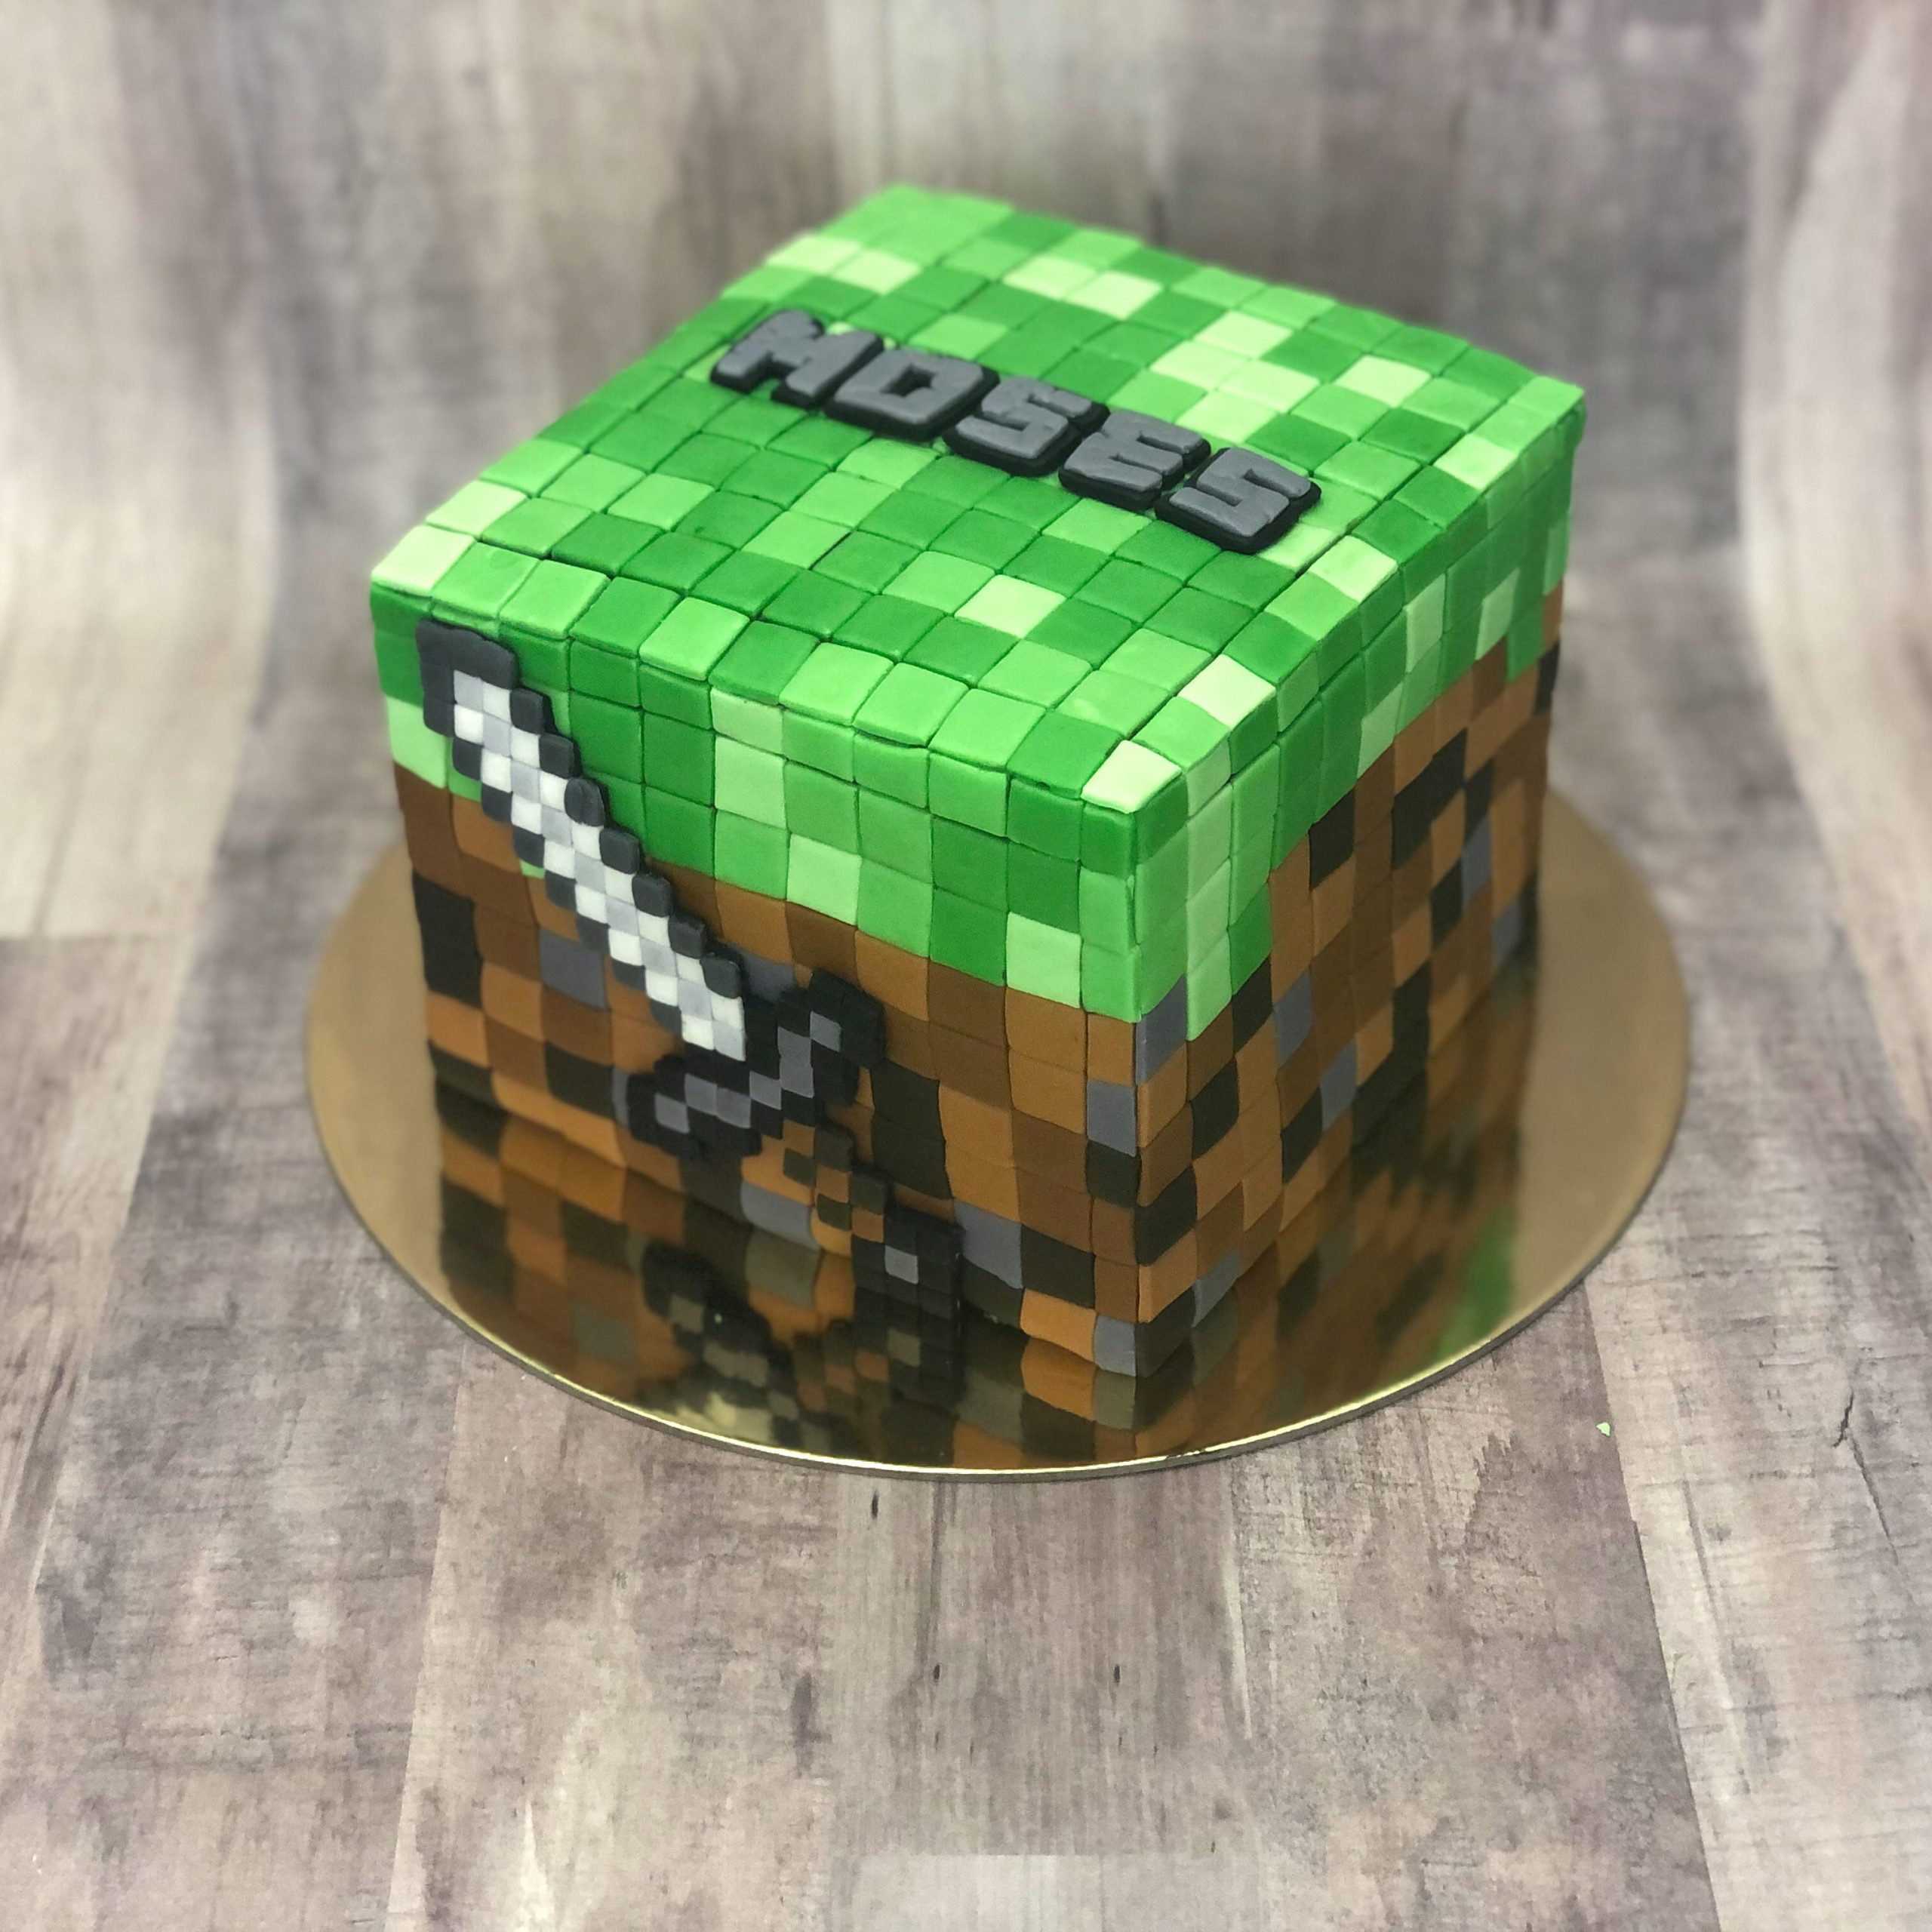 Crafting a Minecraft Cake: A Simple 5-Step Tutorial